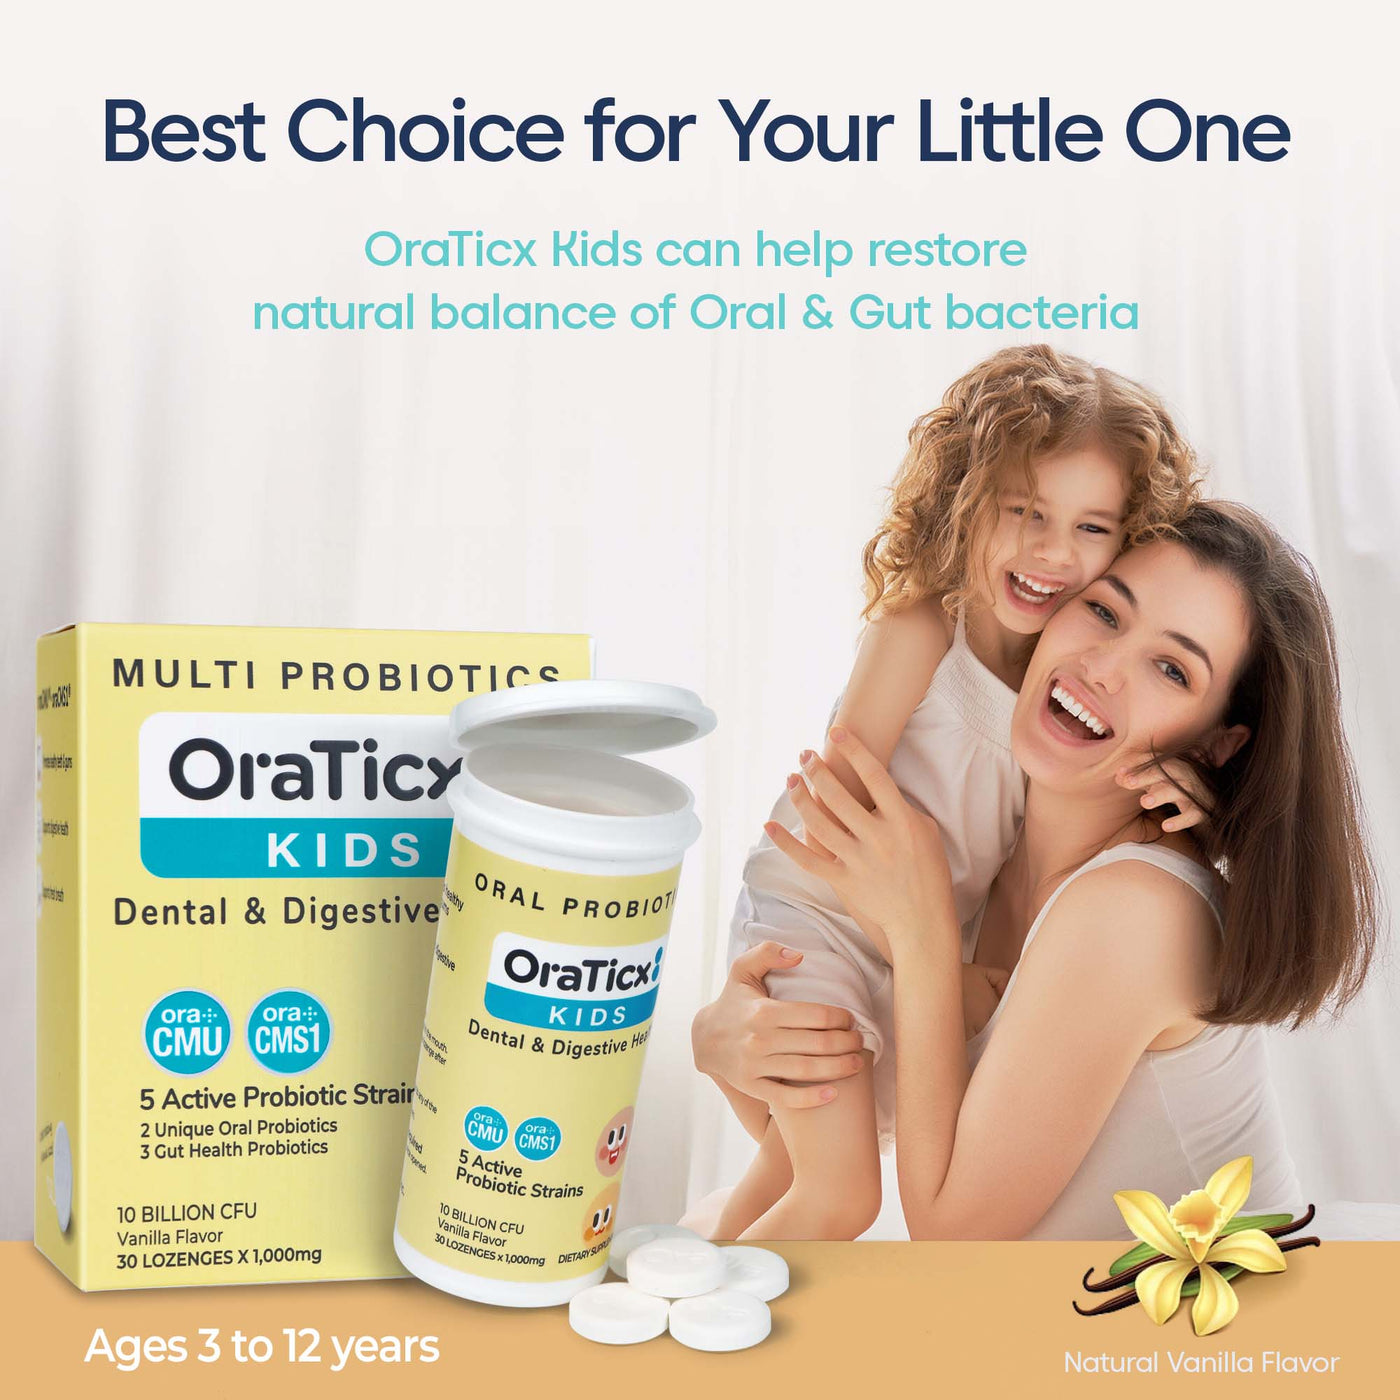 OraTicx kids can help restore natural balance of oral & gut bacteria. reduce cavity, plaque